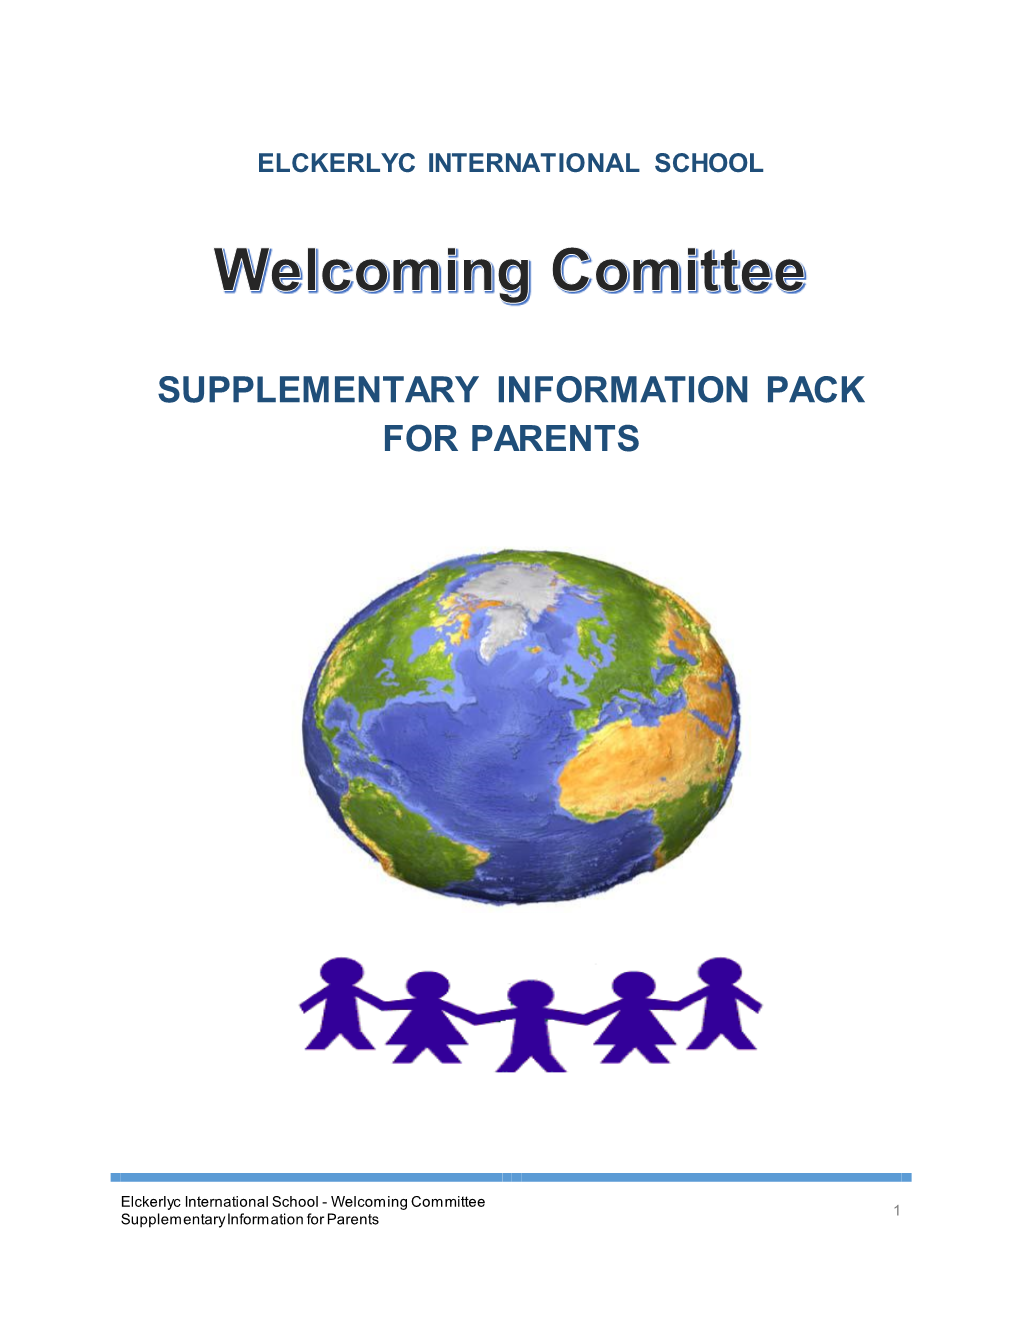 Supplementary Information Pack for Parents